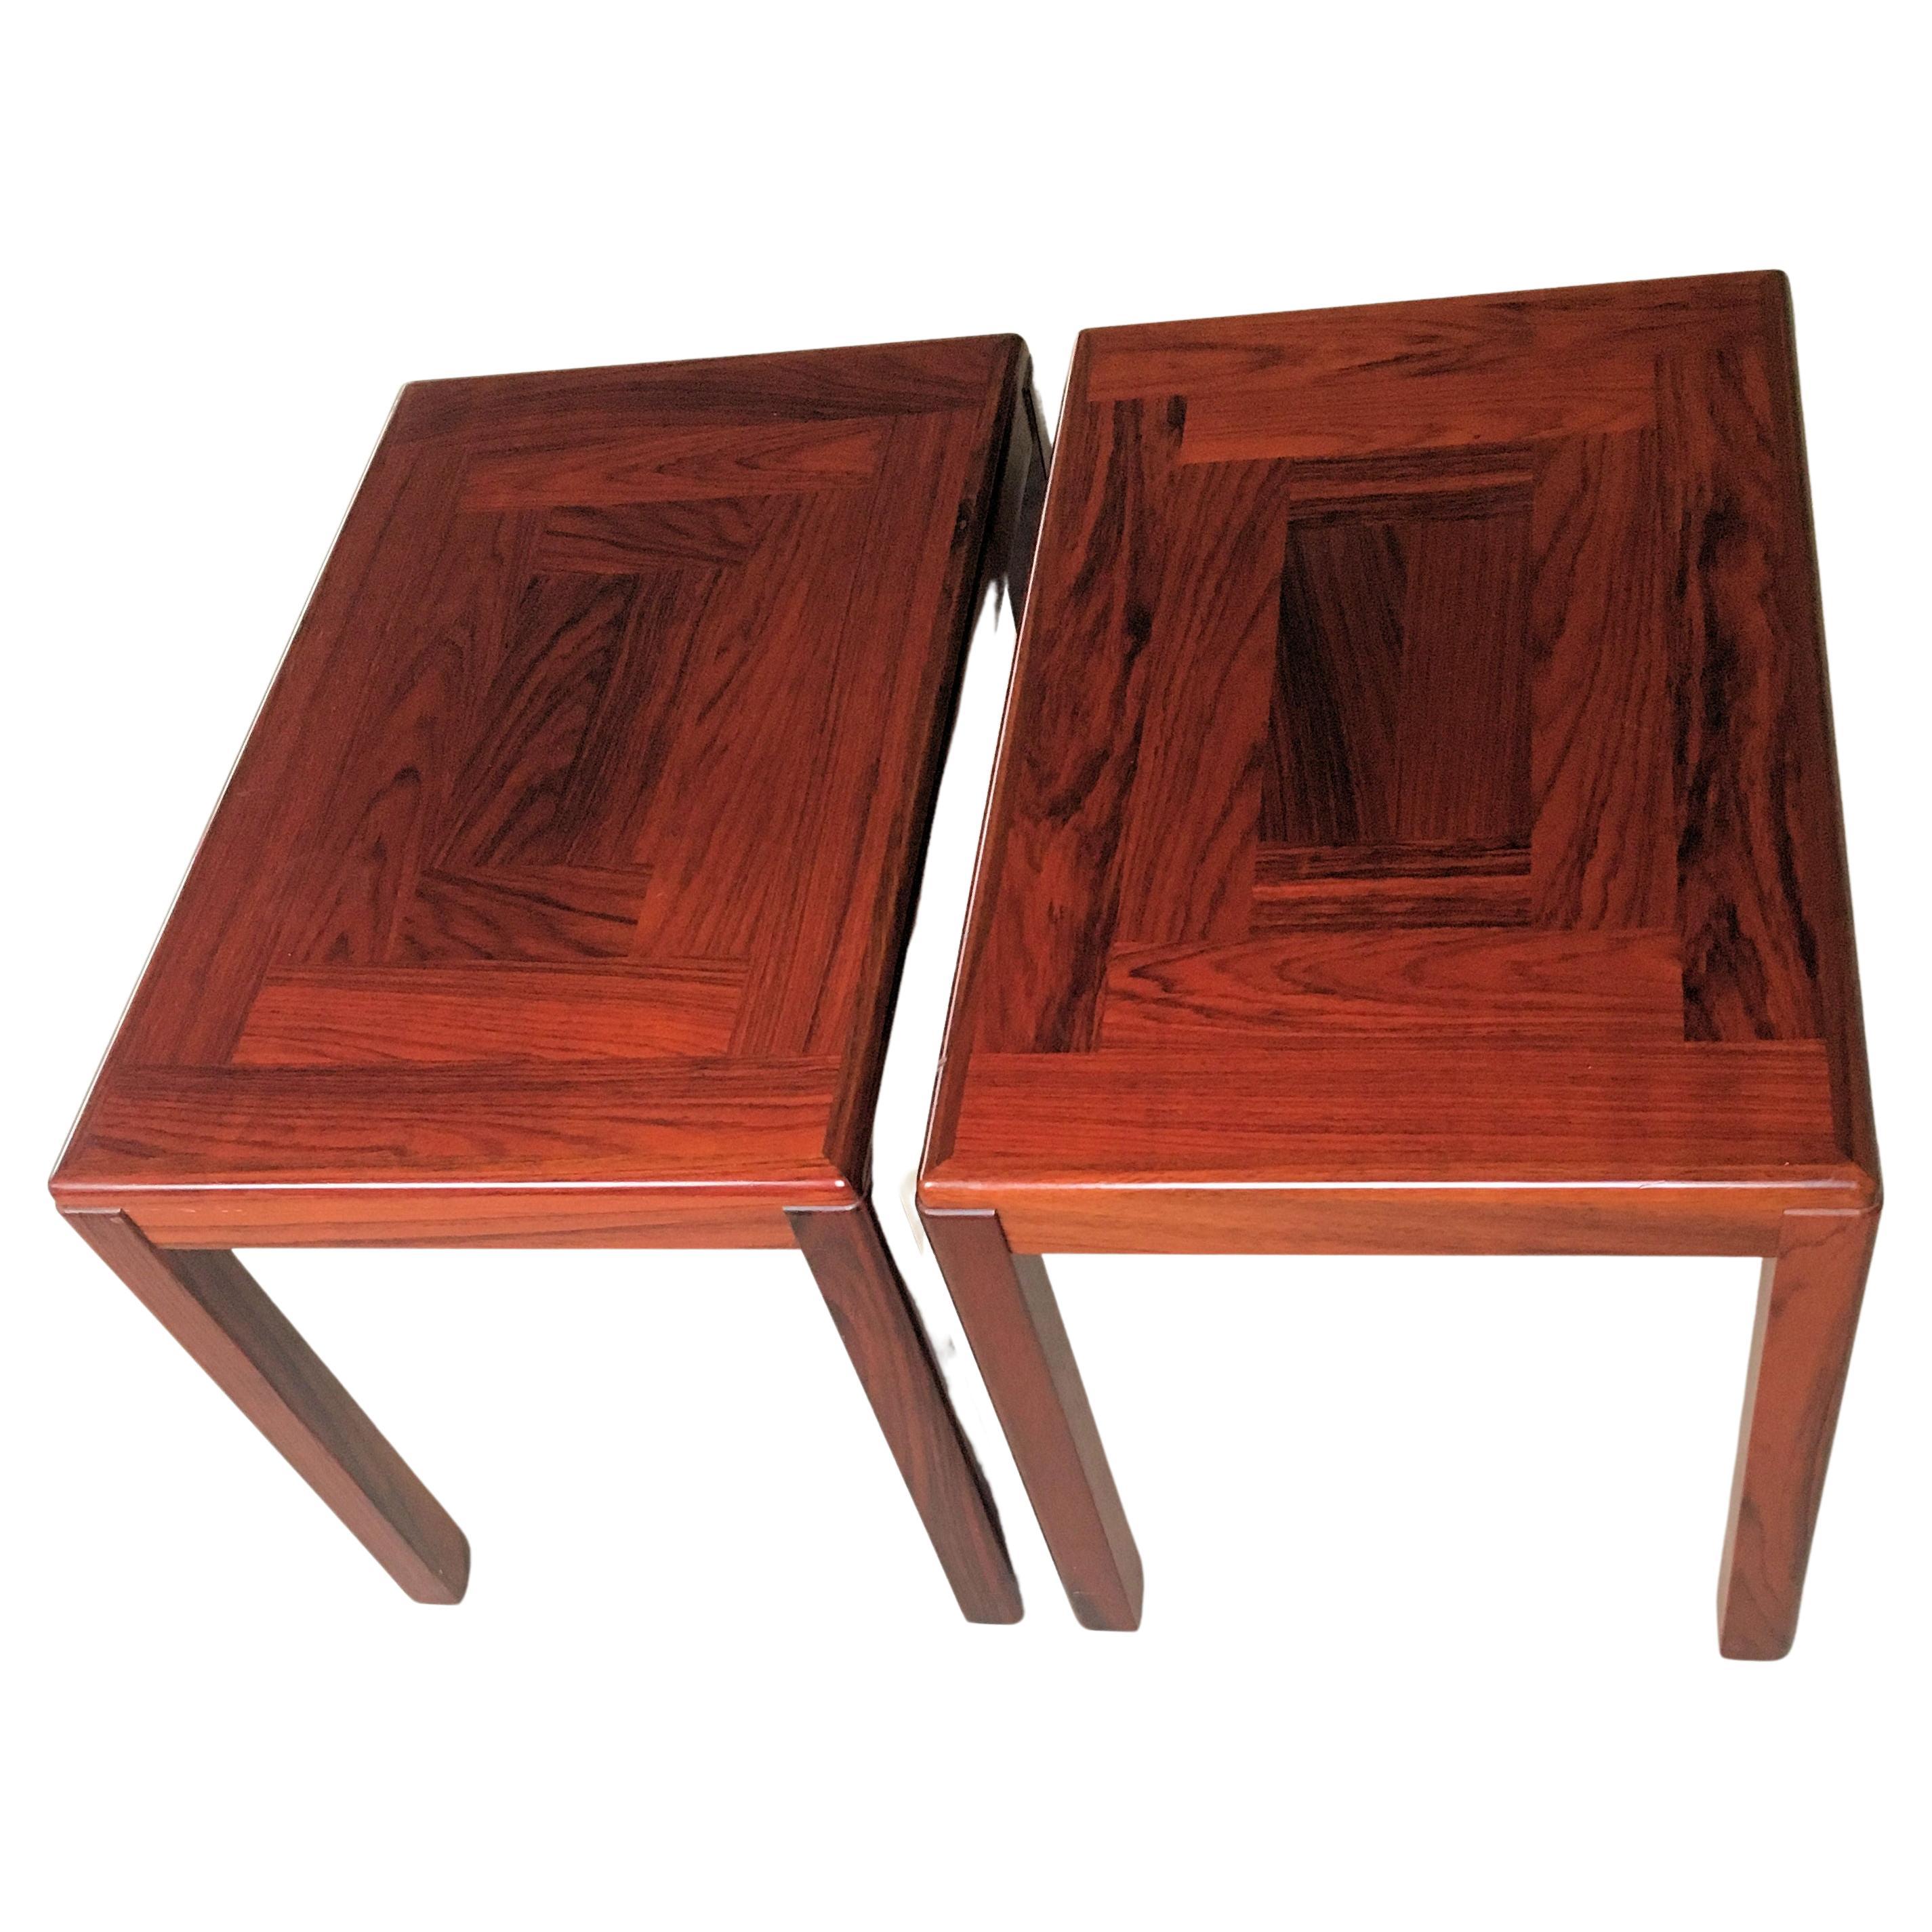 Set of Two Restored Danish 1970's Sidetables in Mahogany by Vejle Stole Fabrik For Sale